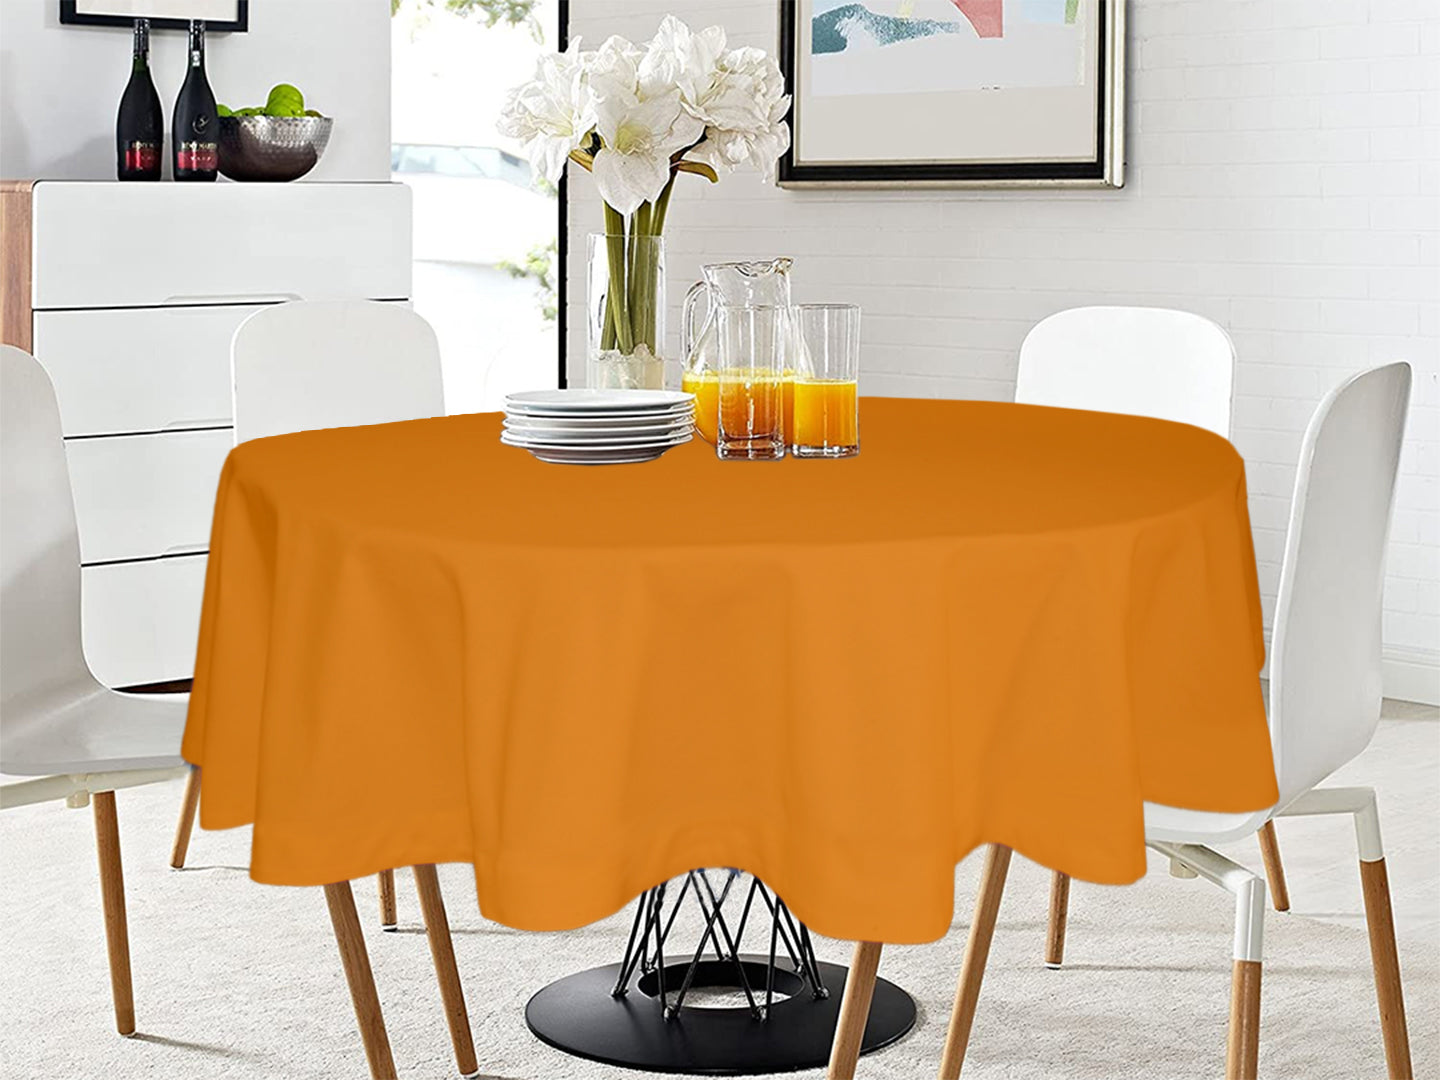 Lushomes Table Cloth, Cotton table cloth, round table cover, Orange table sheet, used for Study, Dastarkhan, Tea, Cyclinder Cover, teapoy (Size 40 Inch Round, 2 Seater Round/Oval Dining Table Cloth)